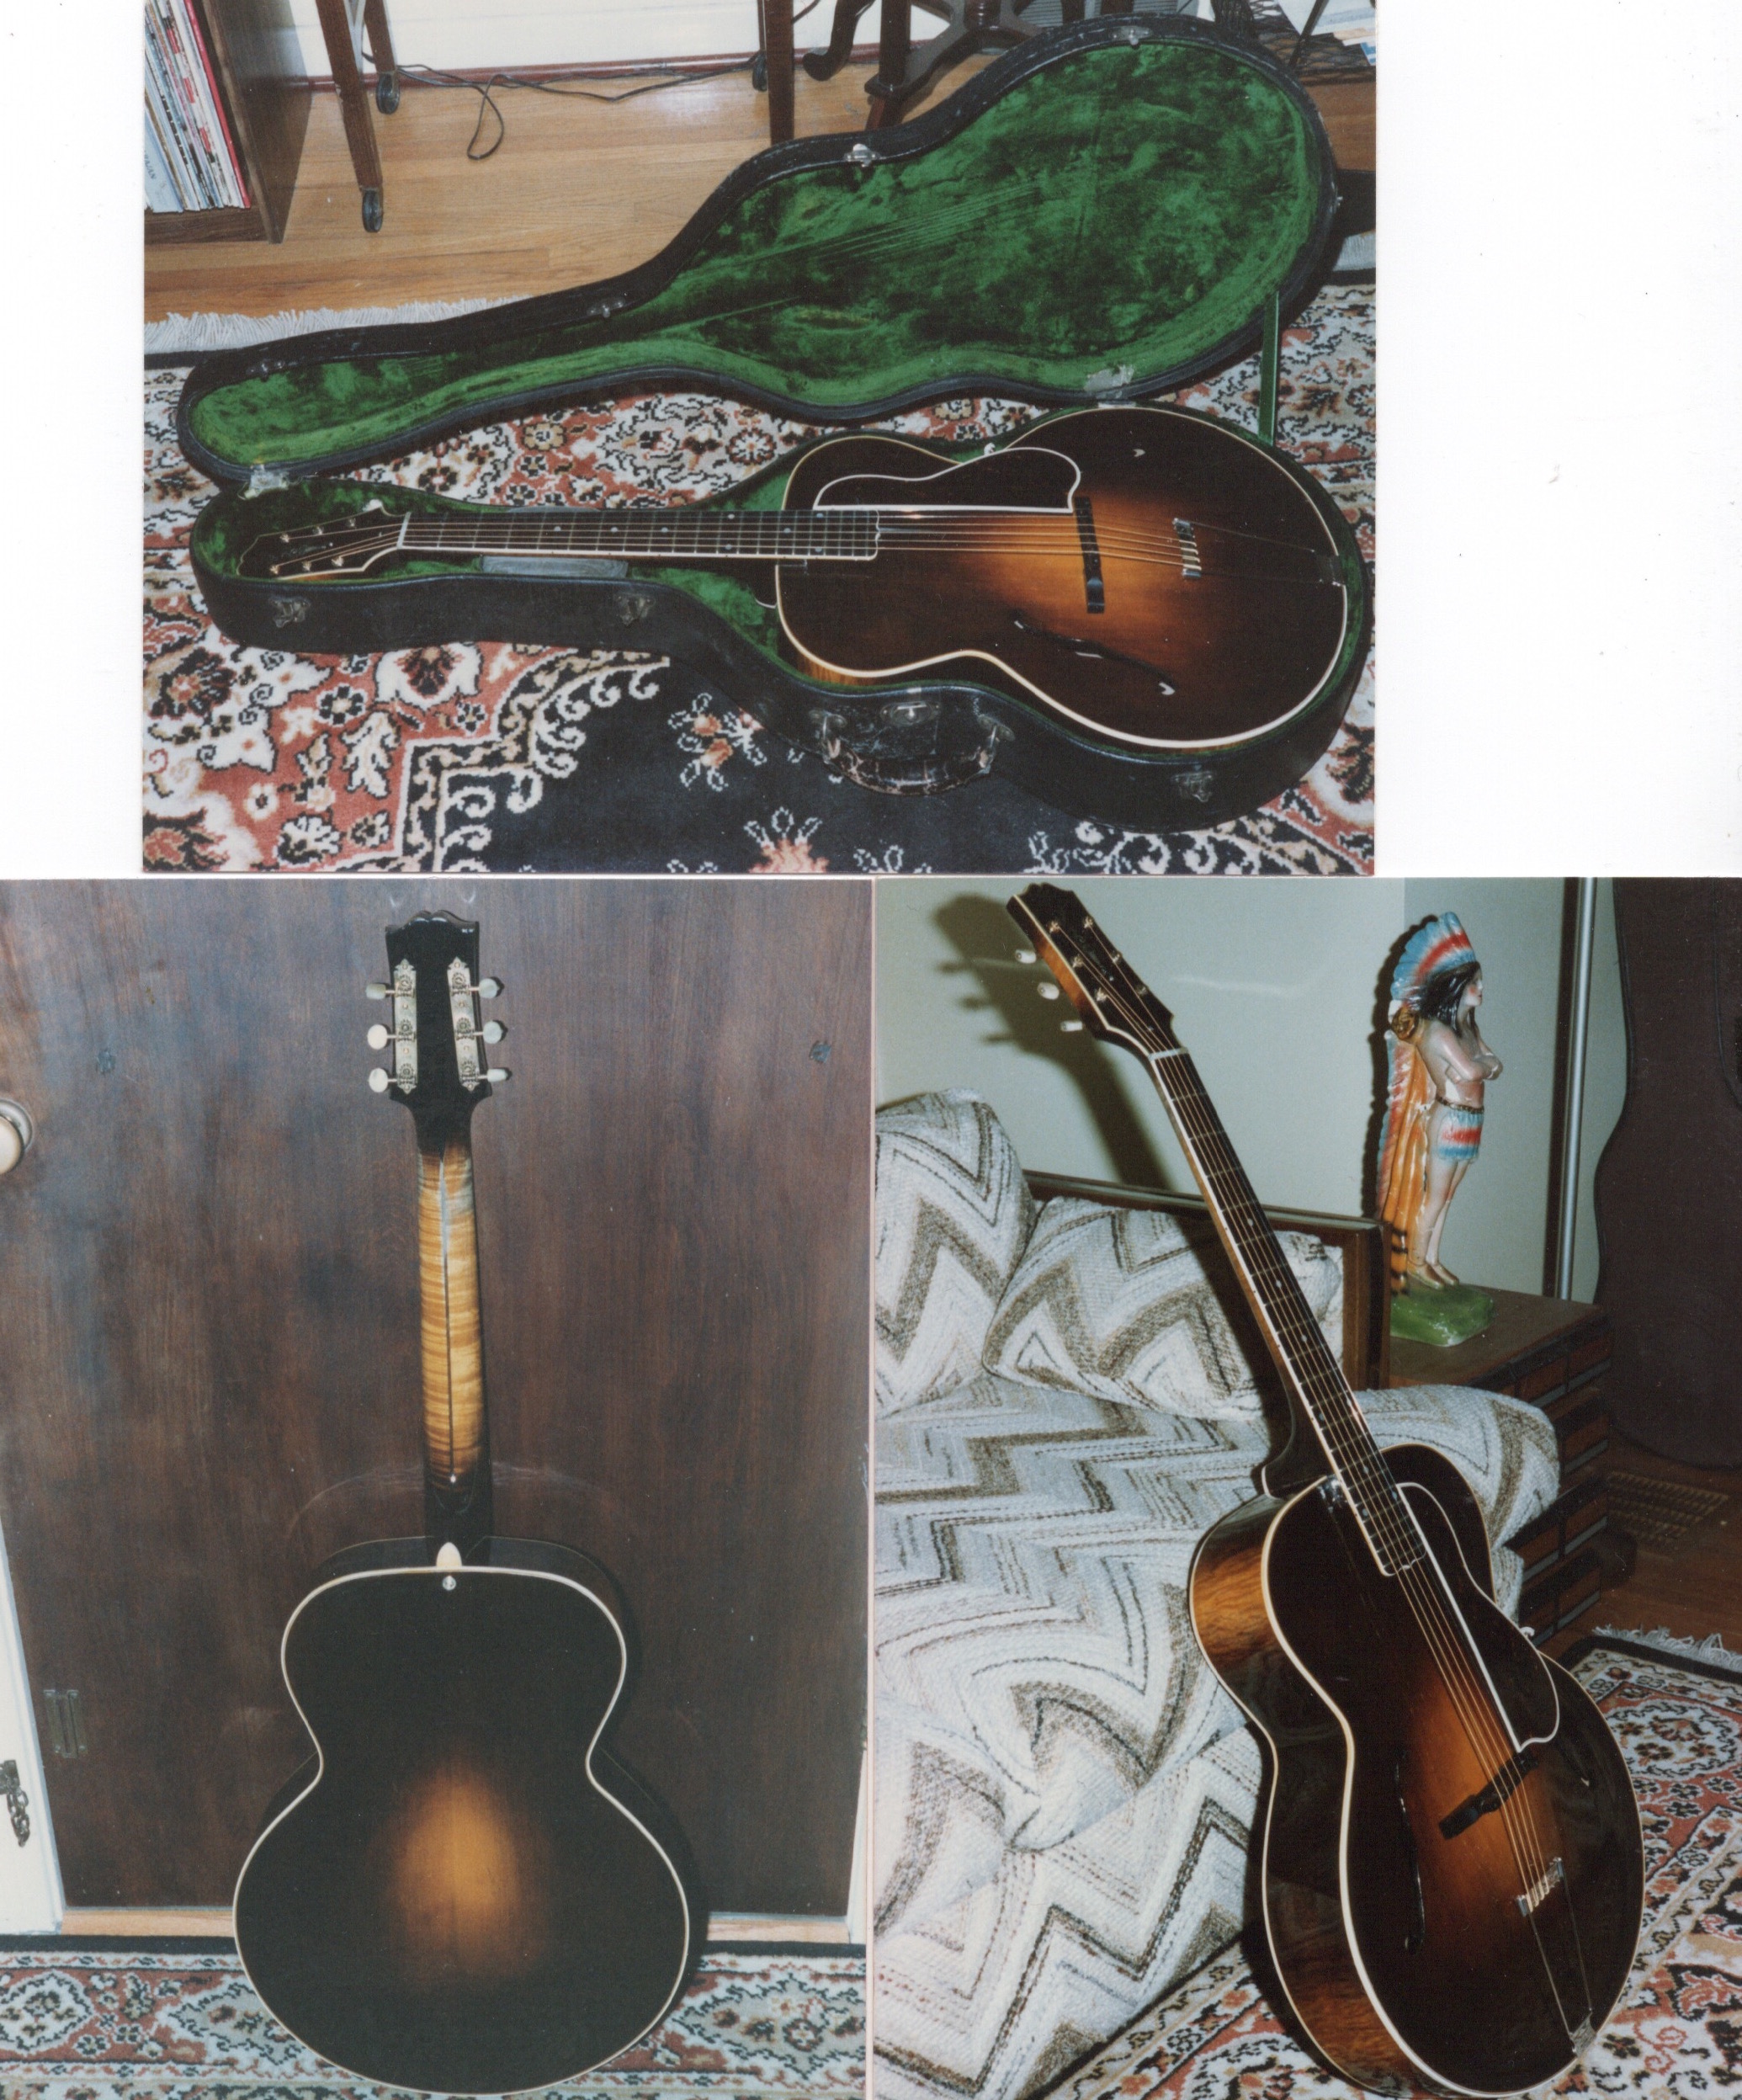 Body Dimensions for a 1920s Gibson L-5?-l5pics-jpg